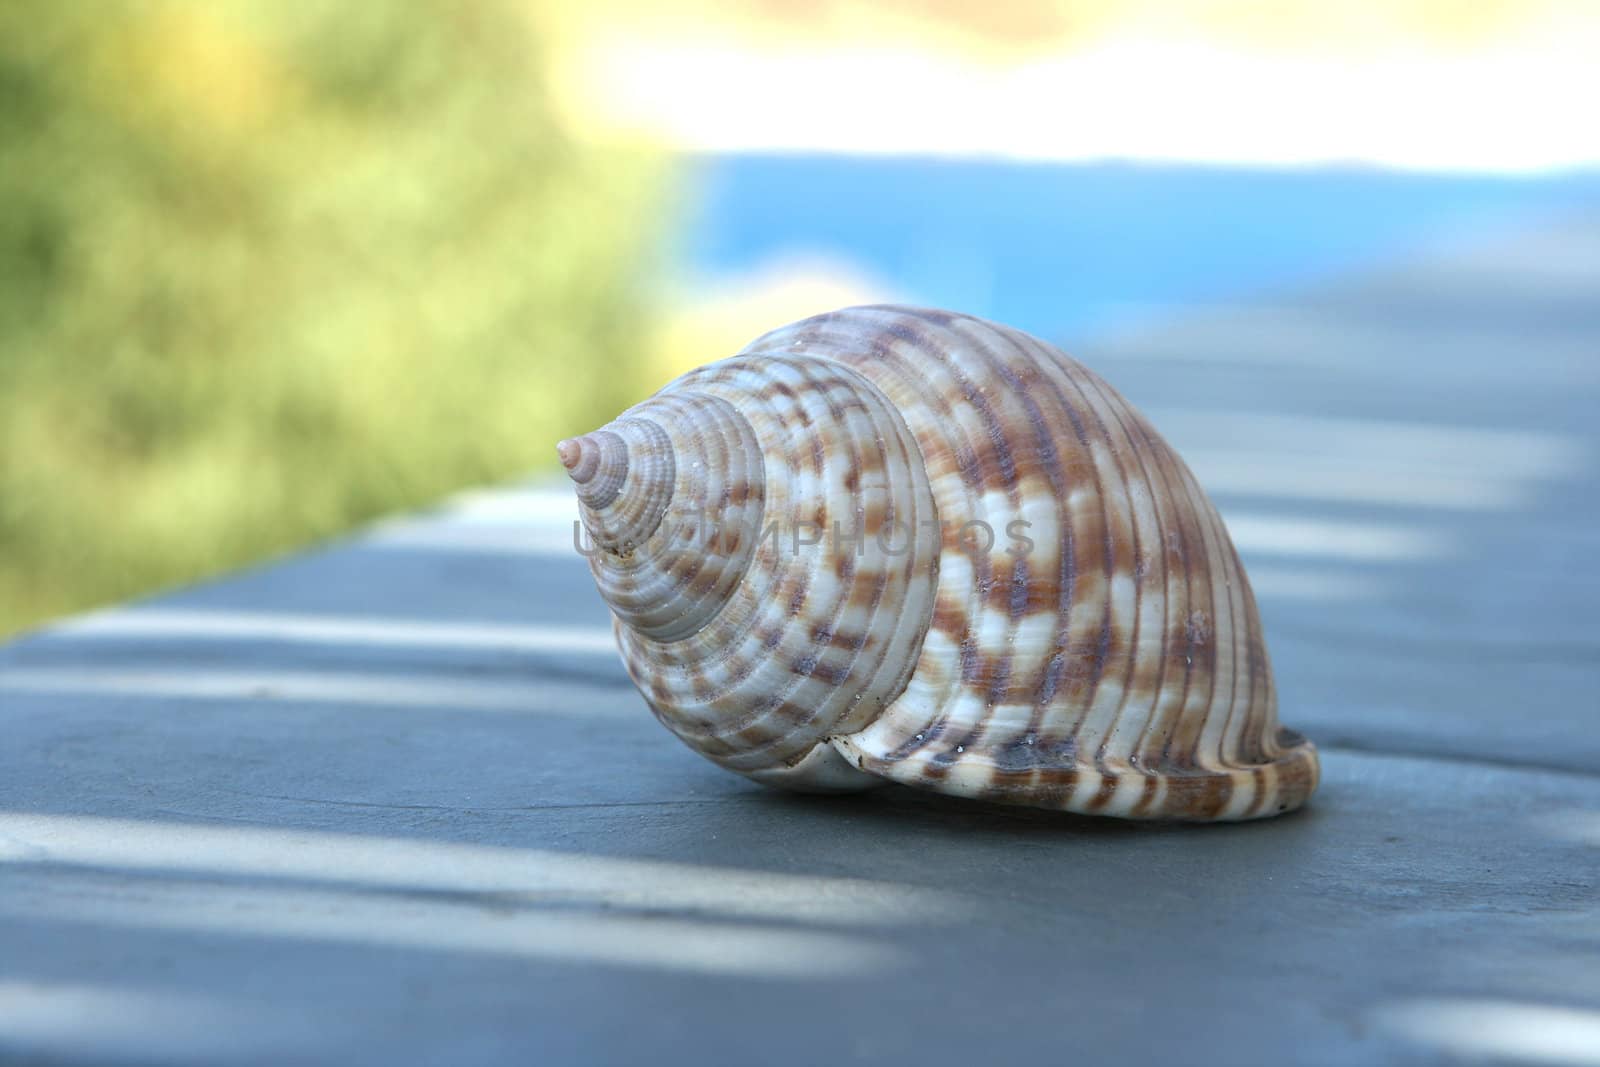 sea shell closeup with nature green defocus background and copyspace